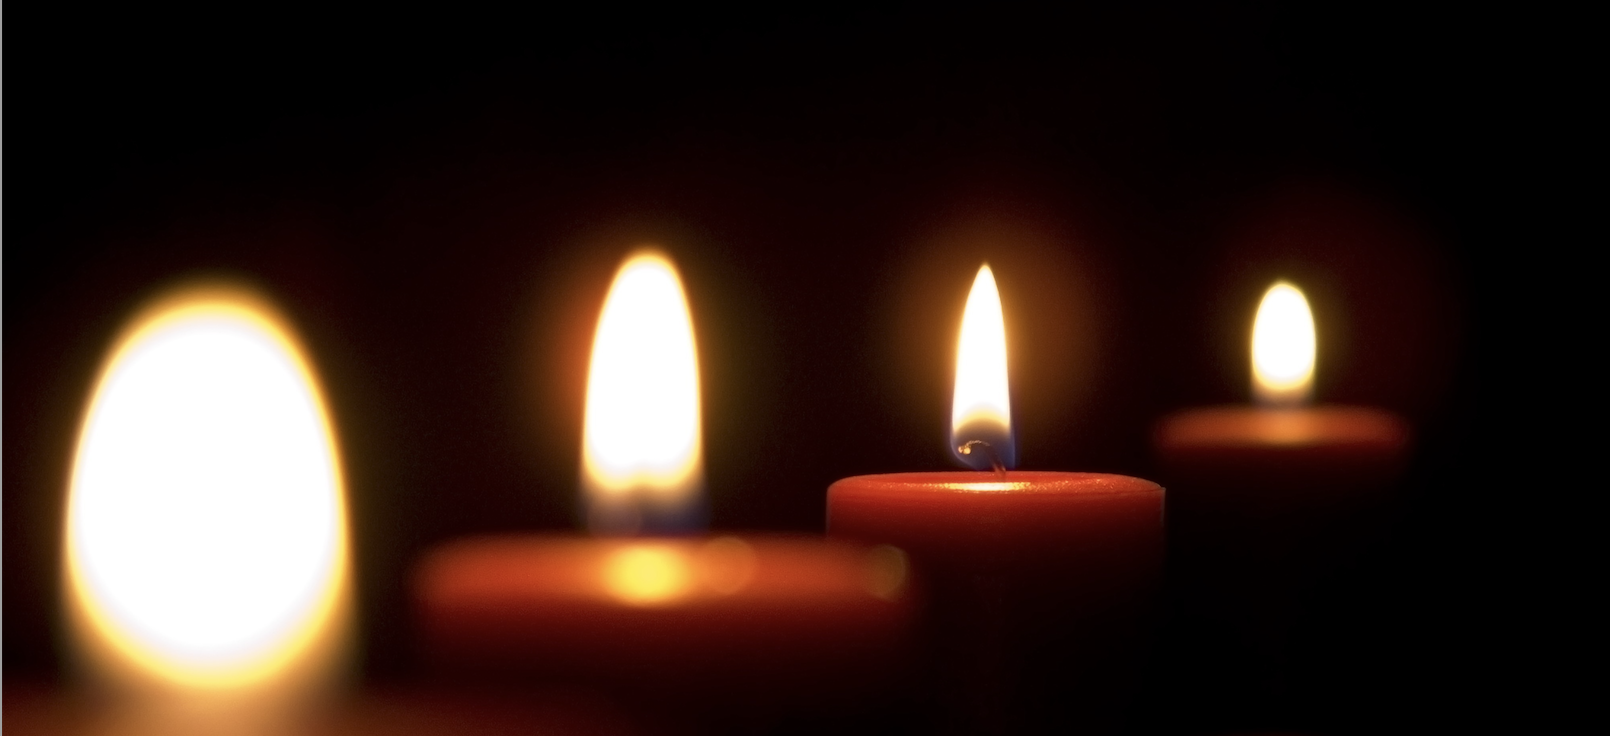 Candles: What do they emit when lit?